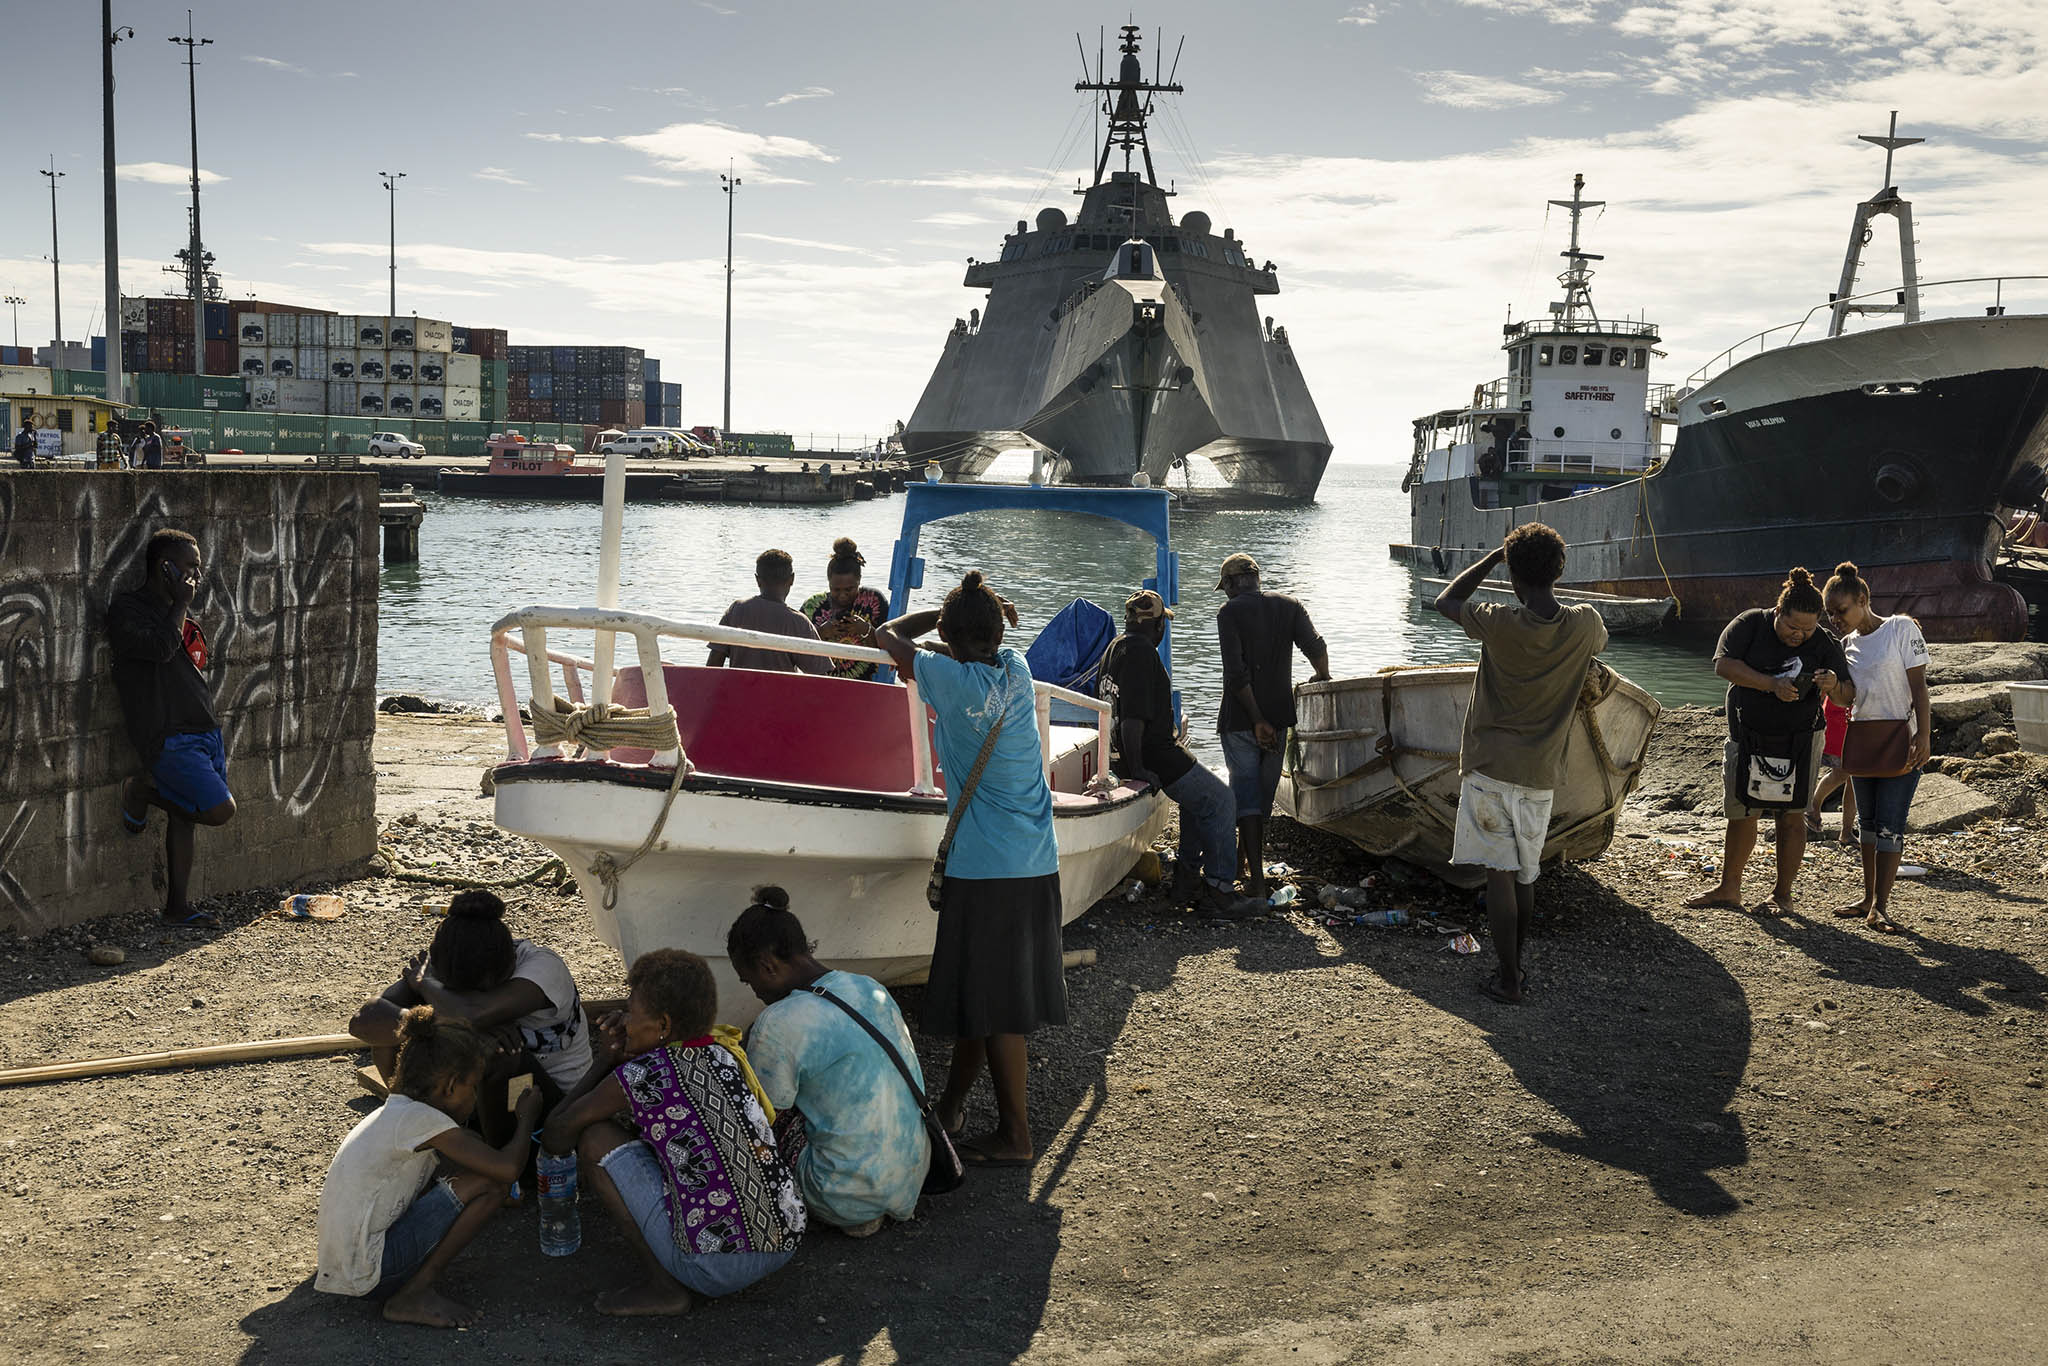 A U.S. combat ship visits the capital of the Solomon Islands as part of a ceremony in marking the 80th anniversary of the Guadalcanal battles, in Honiara, Solomon Islands on Aug. 7, 2022.  (Matthew Abbott/The New York Times)